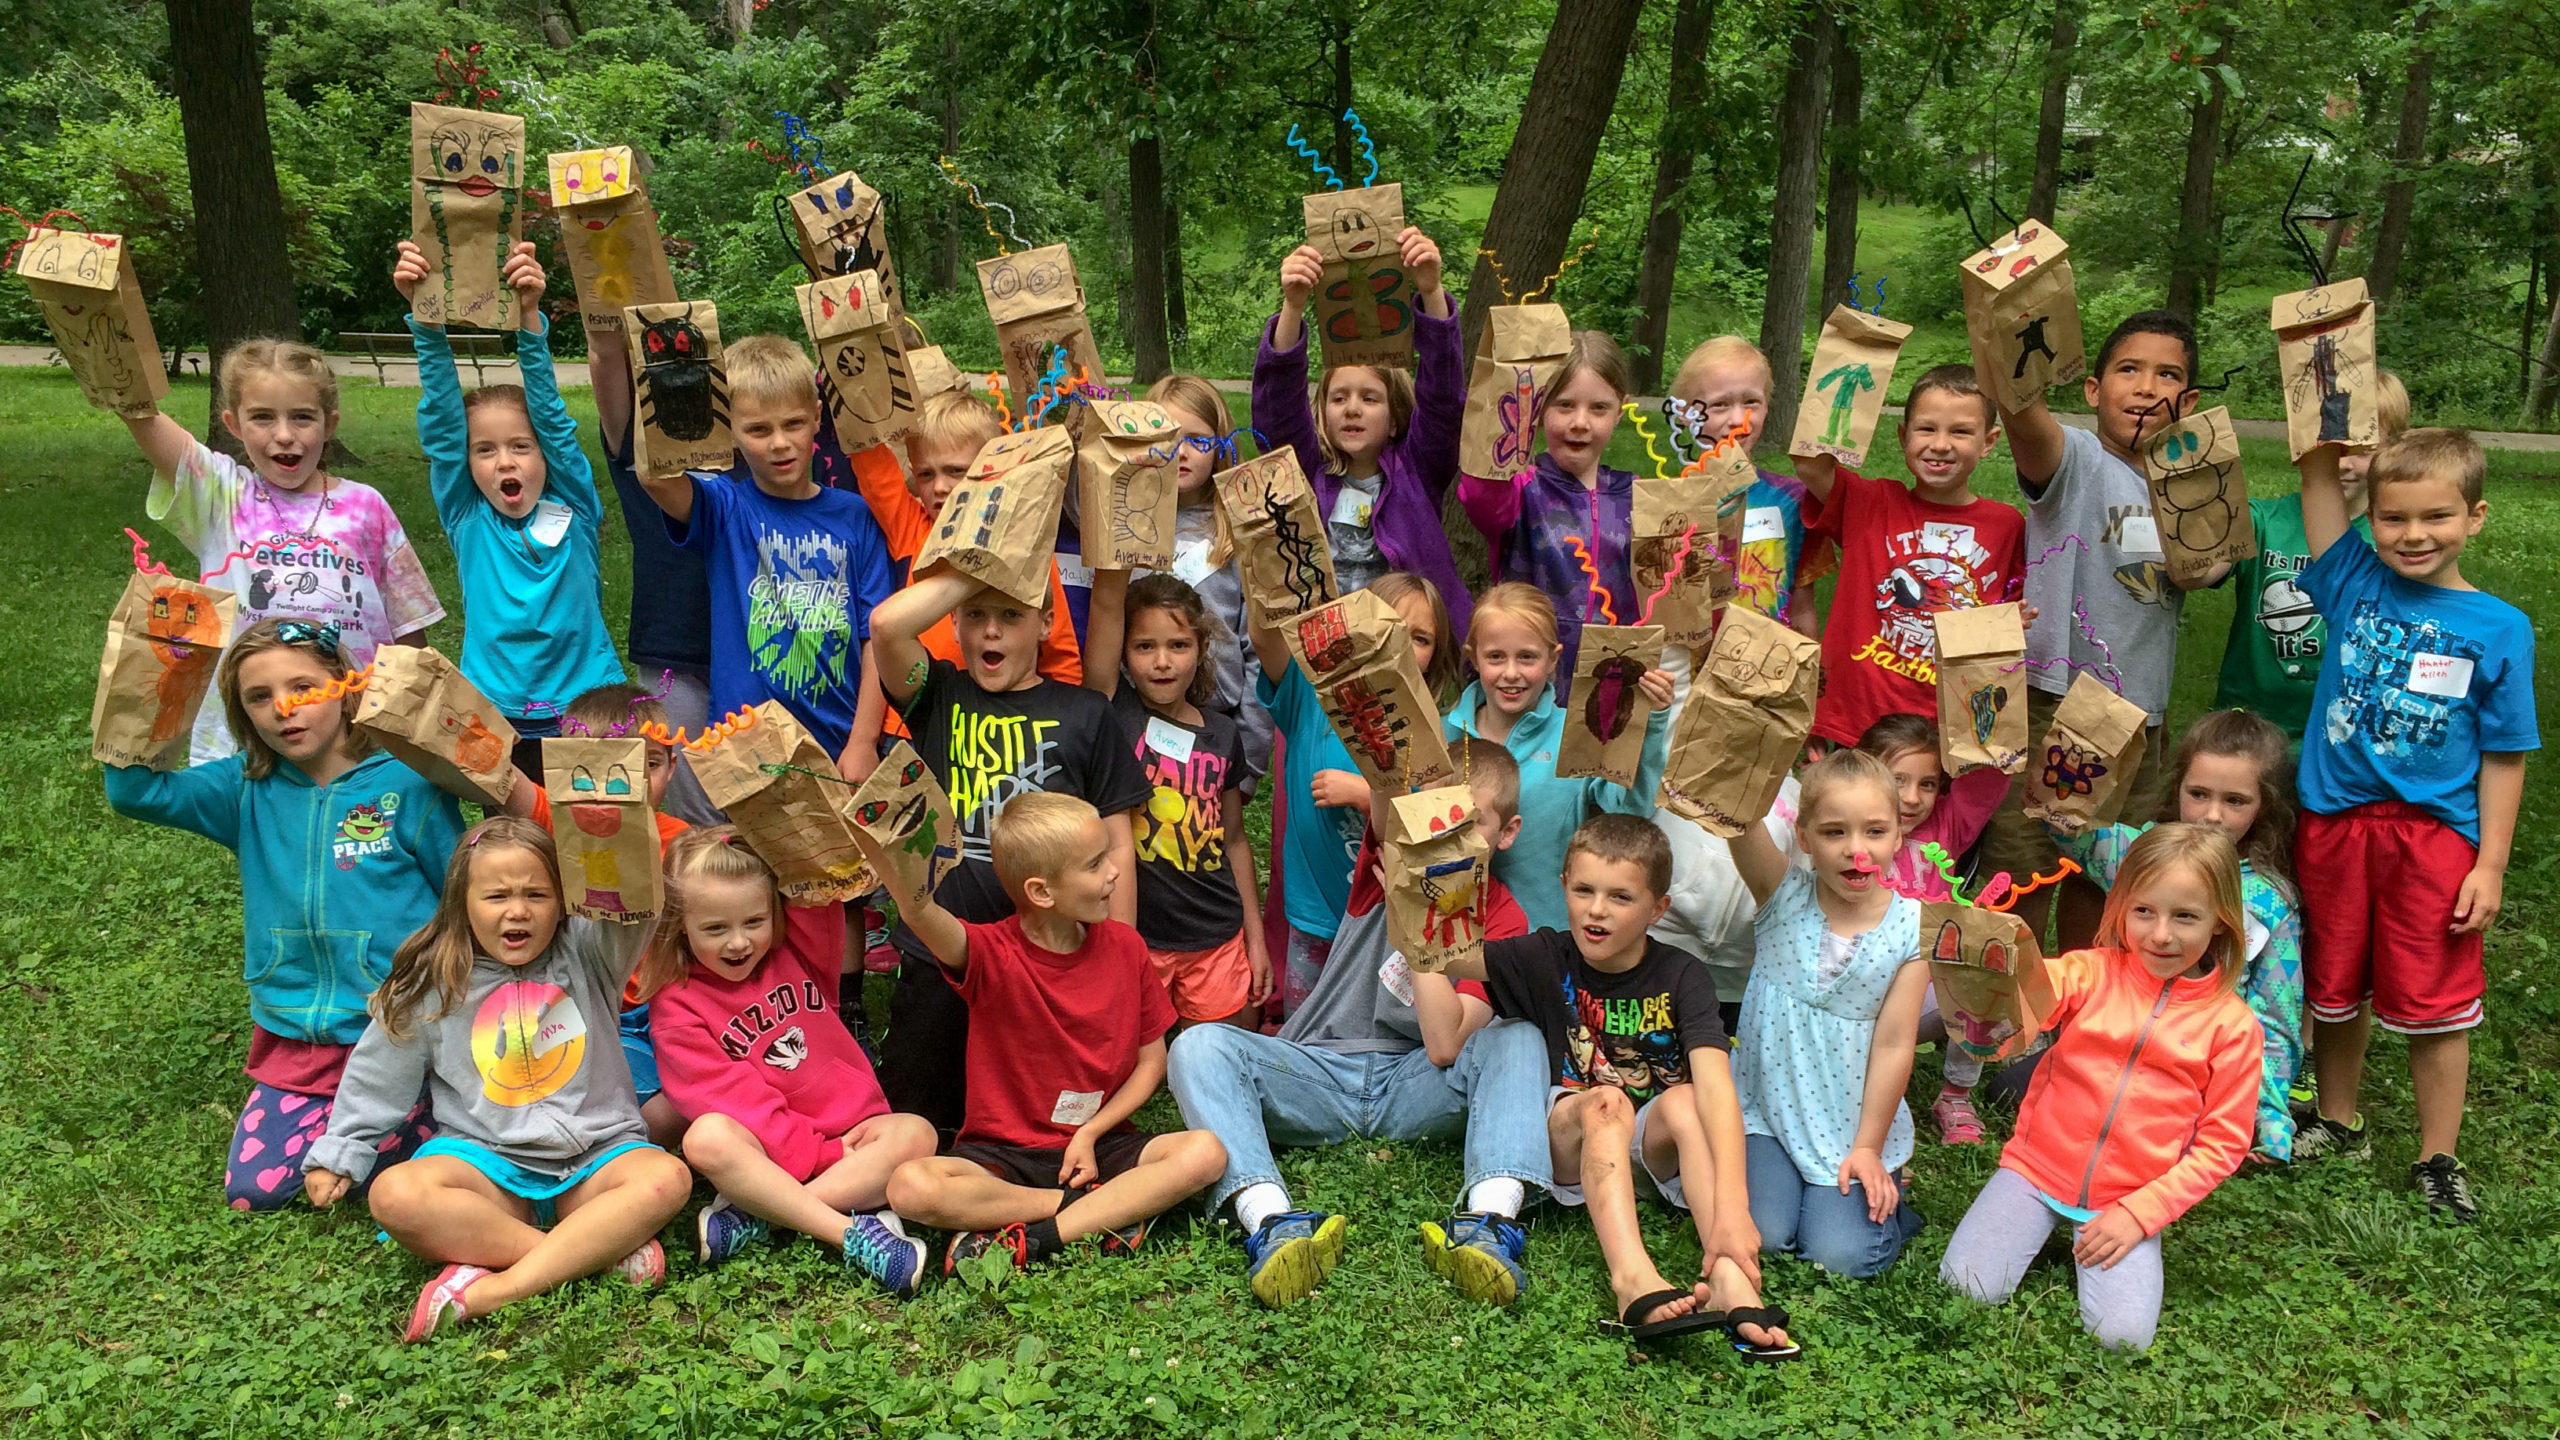 Group of campers with paper bag puppets